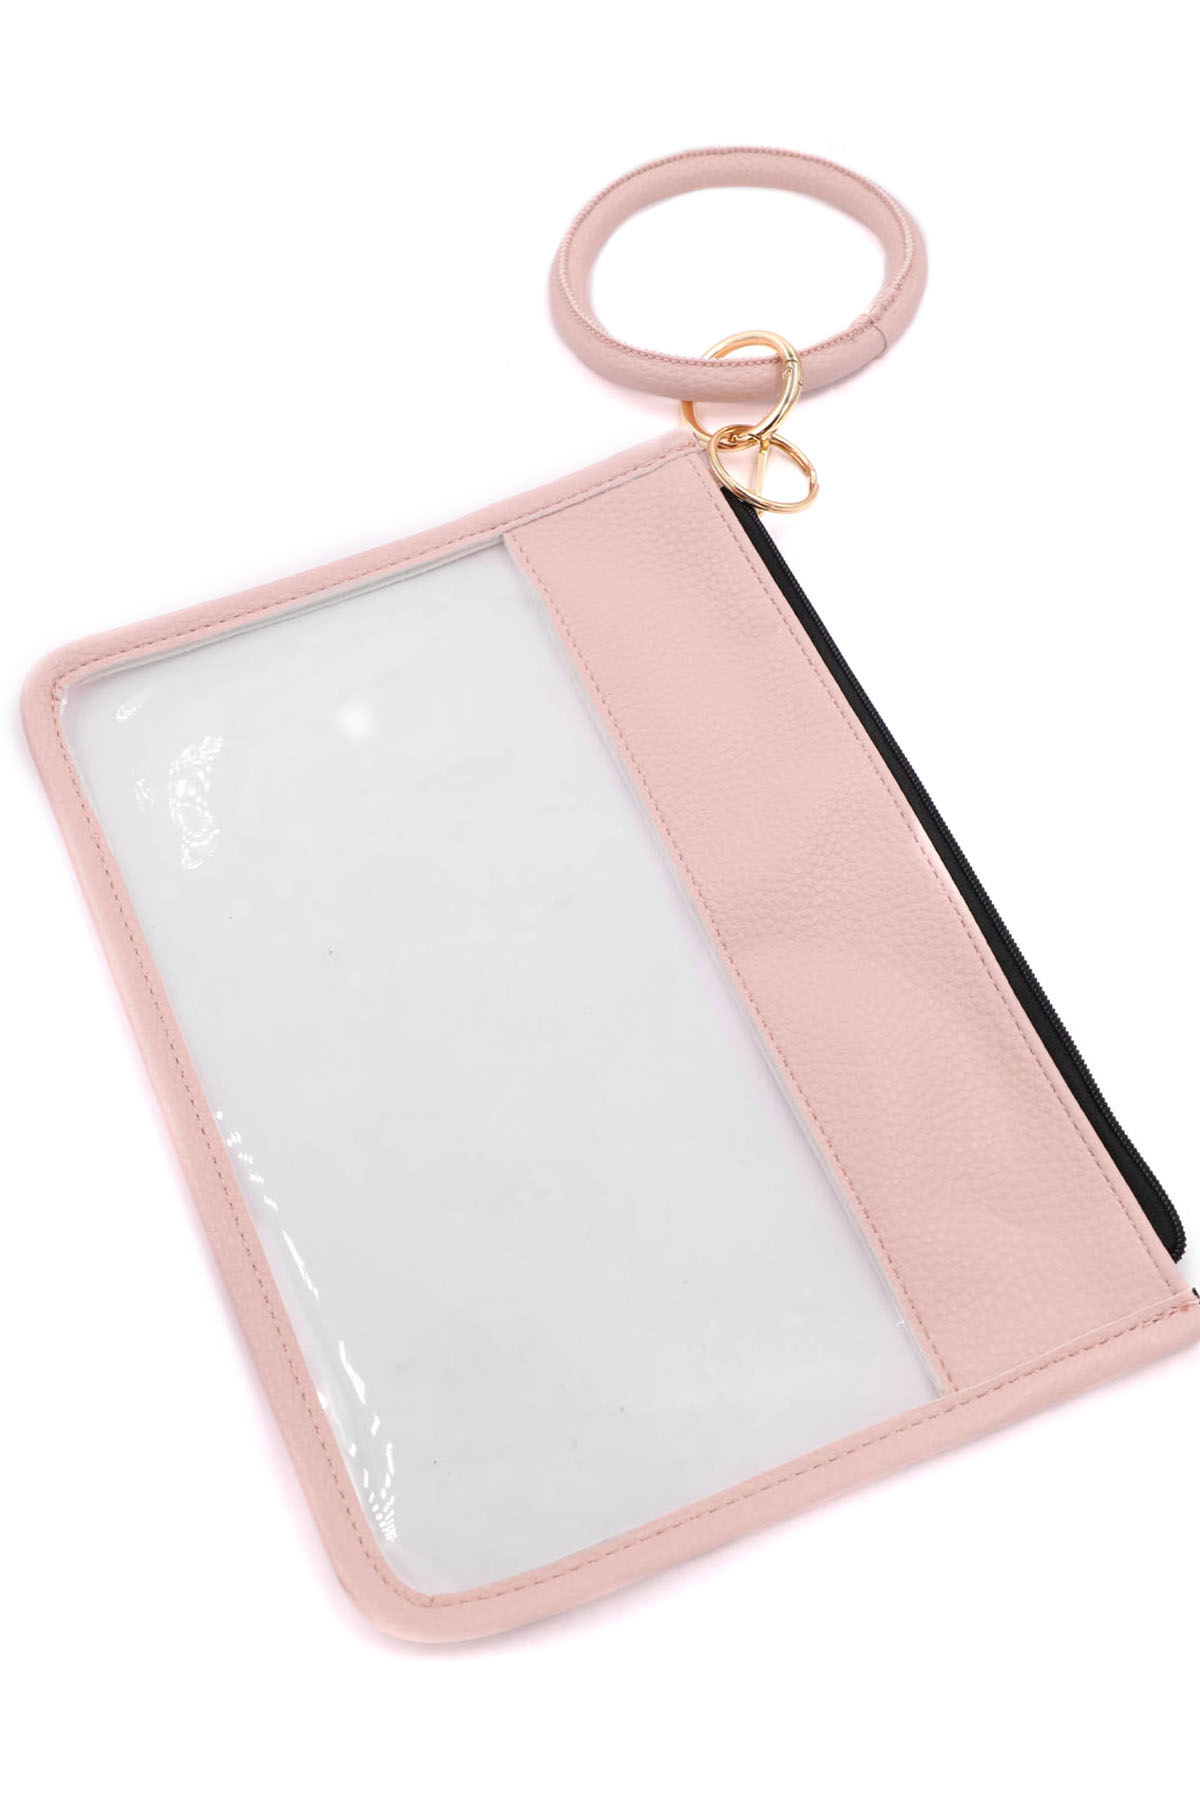 PINK Clear Pouch Keychain - Key Chains